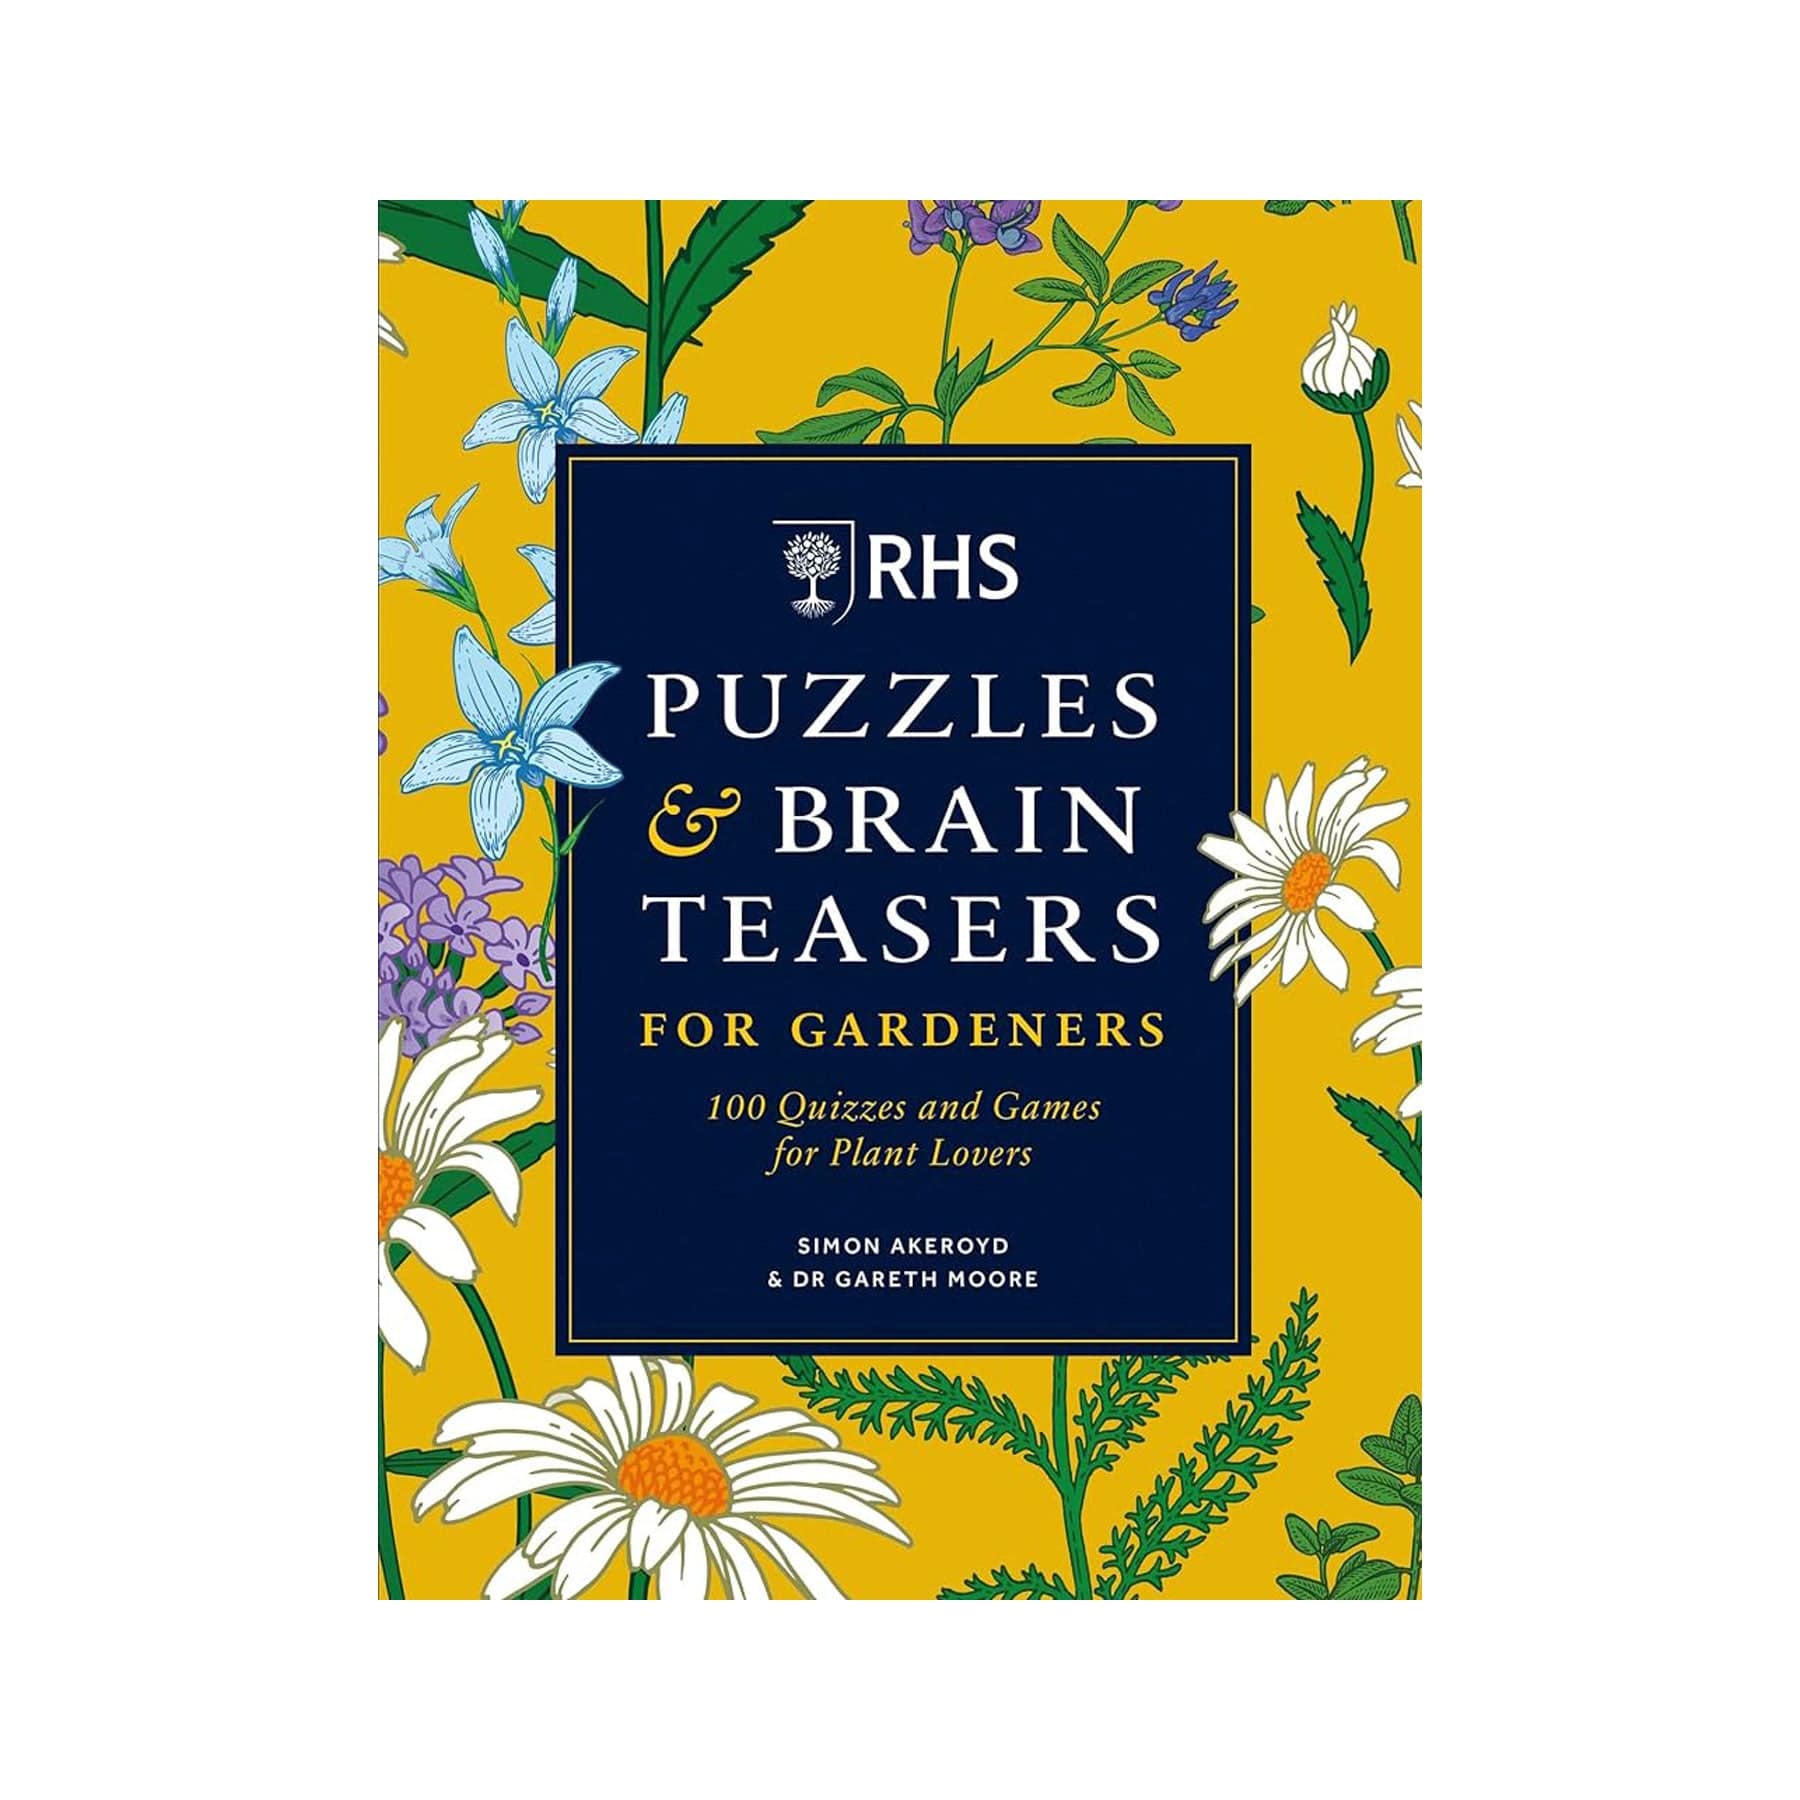 RHS puzzles & brain teasers for gardeners